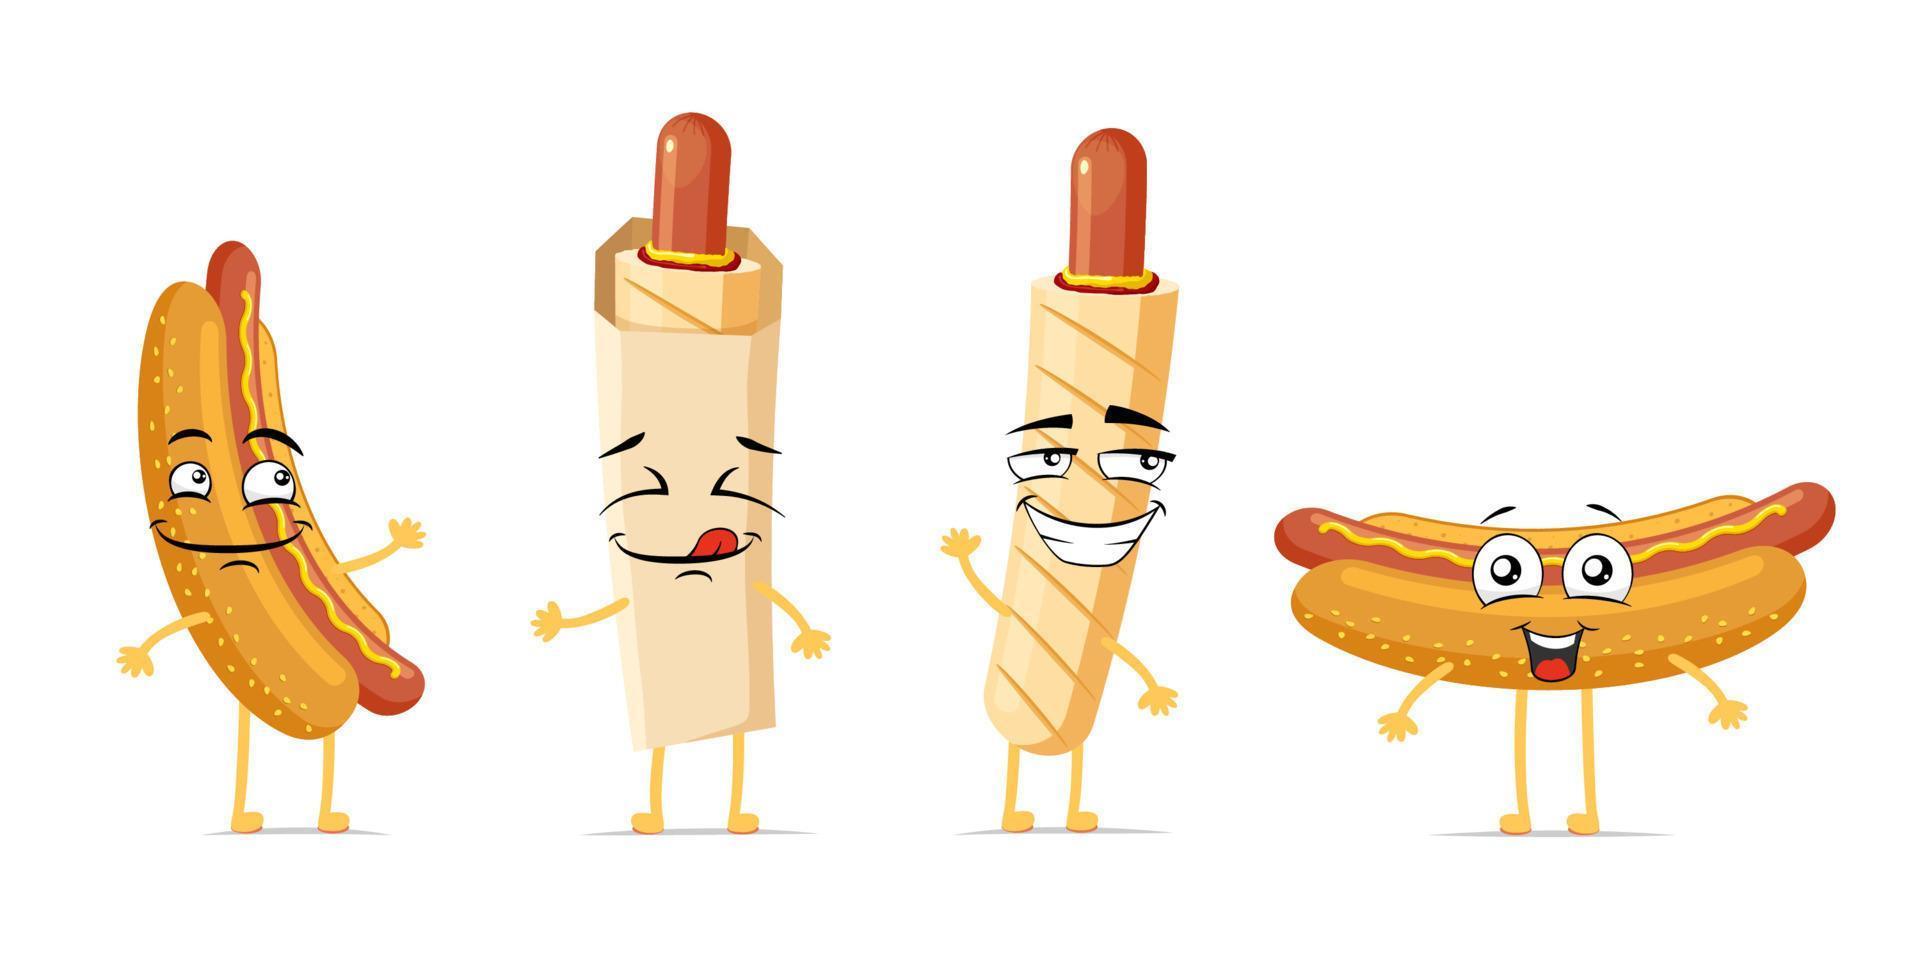 Hot dog funny smiling cartoon character set. Cooked french sausage in bun cute happy face expression mascot collection. Different fast food joyful comic emoticons vector eps illustration